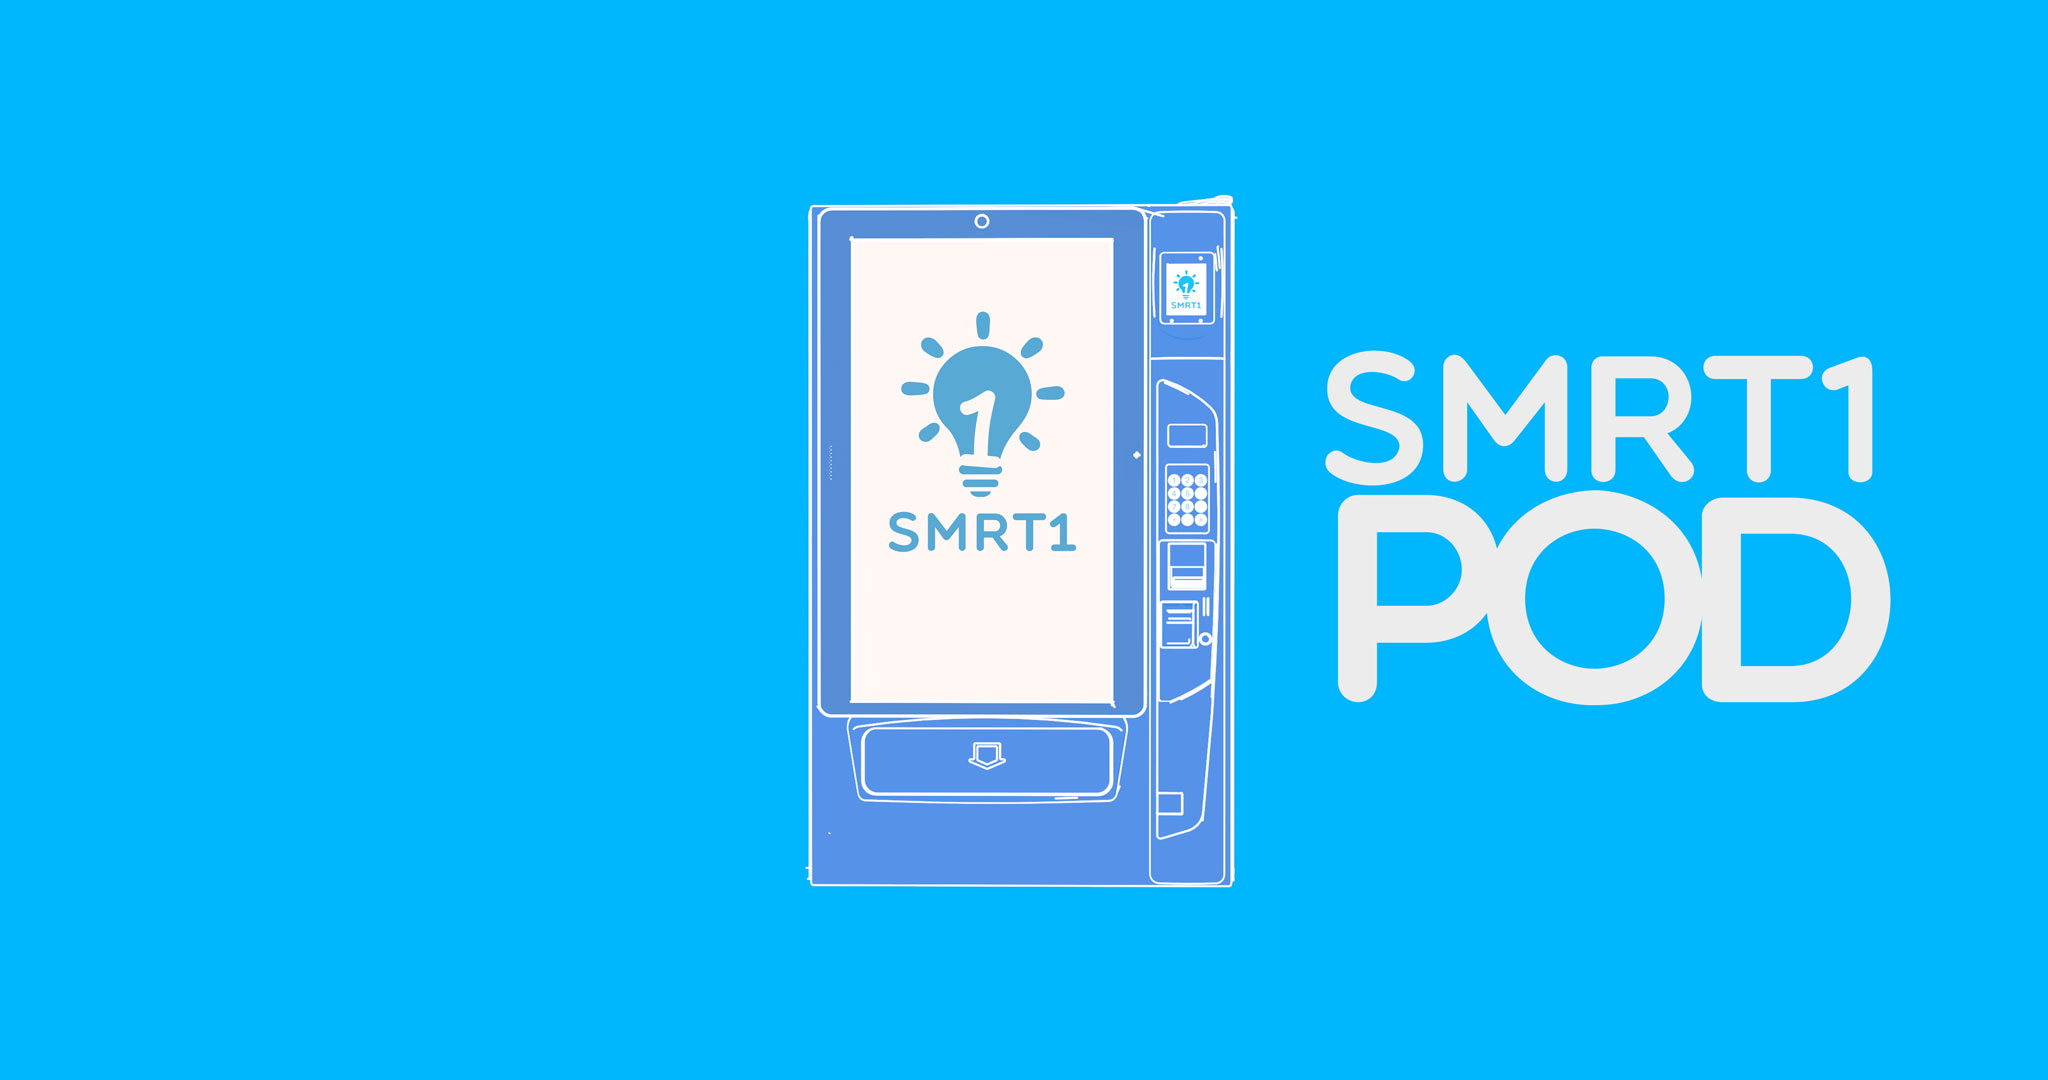 What is the SMRT1 POD & Personalized On-Demand?